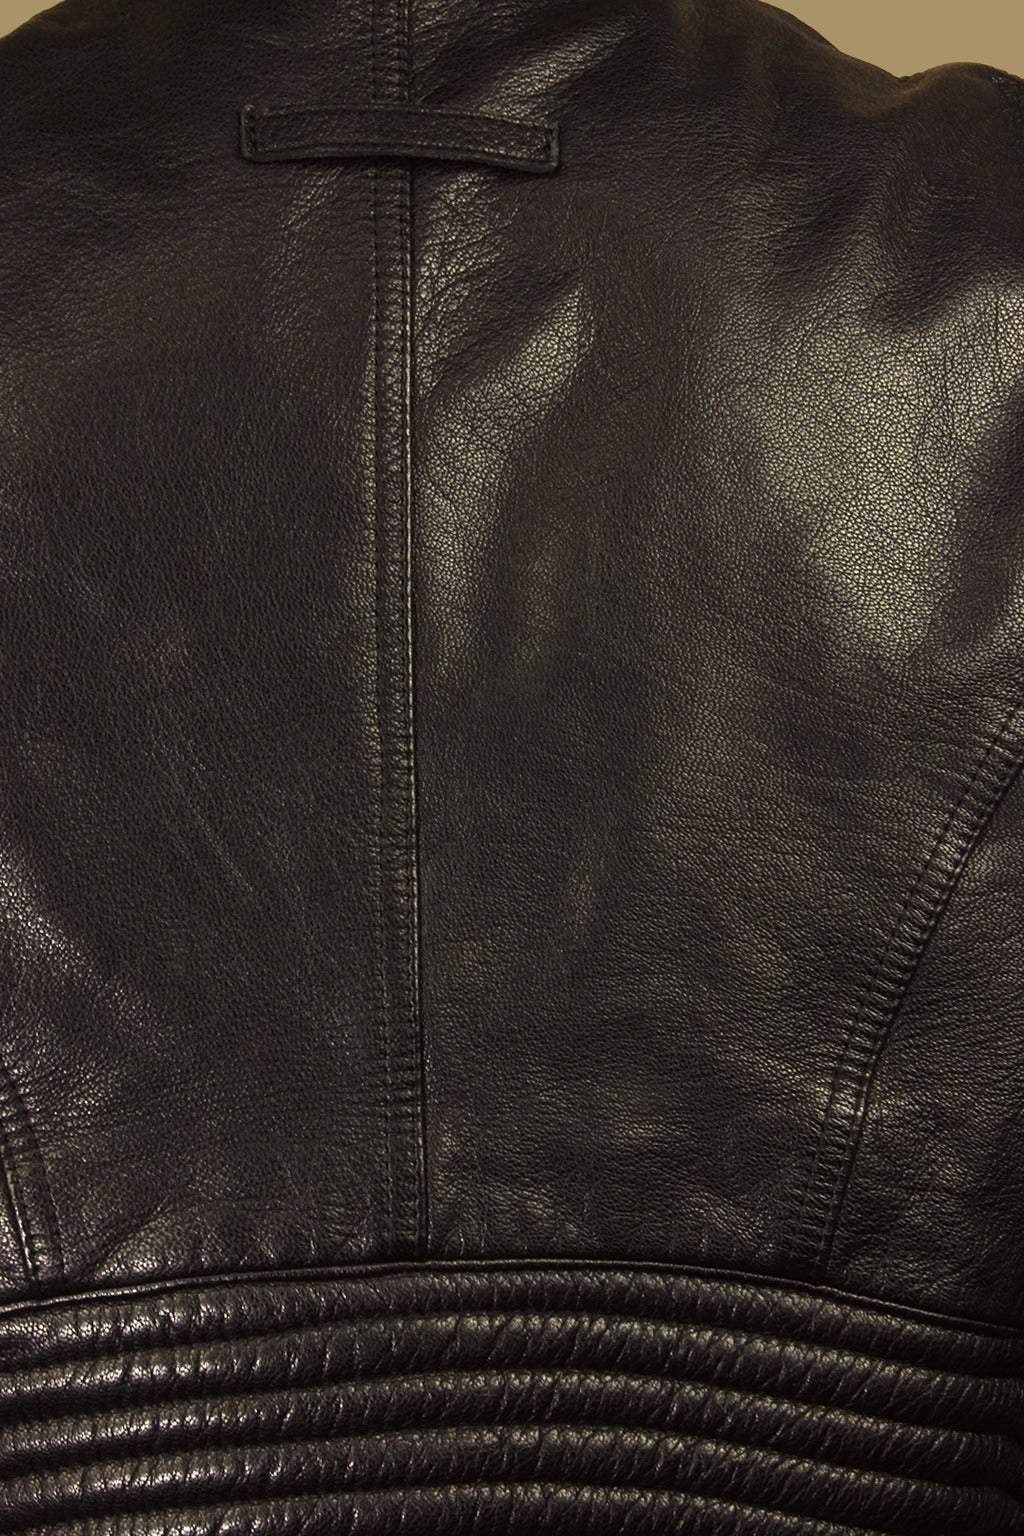 Jean Paul Gaultier Men's 1990s Highly Styled Leather Moto Jacket 5